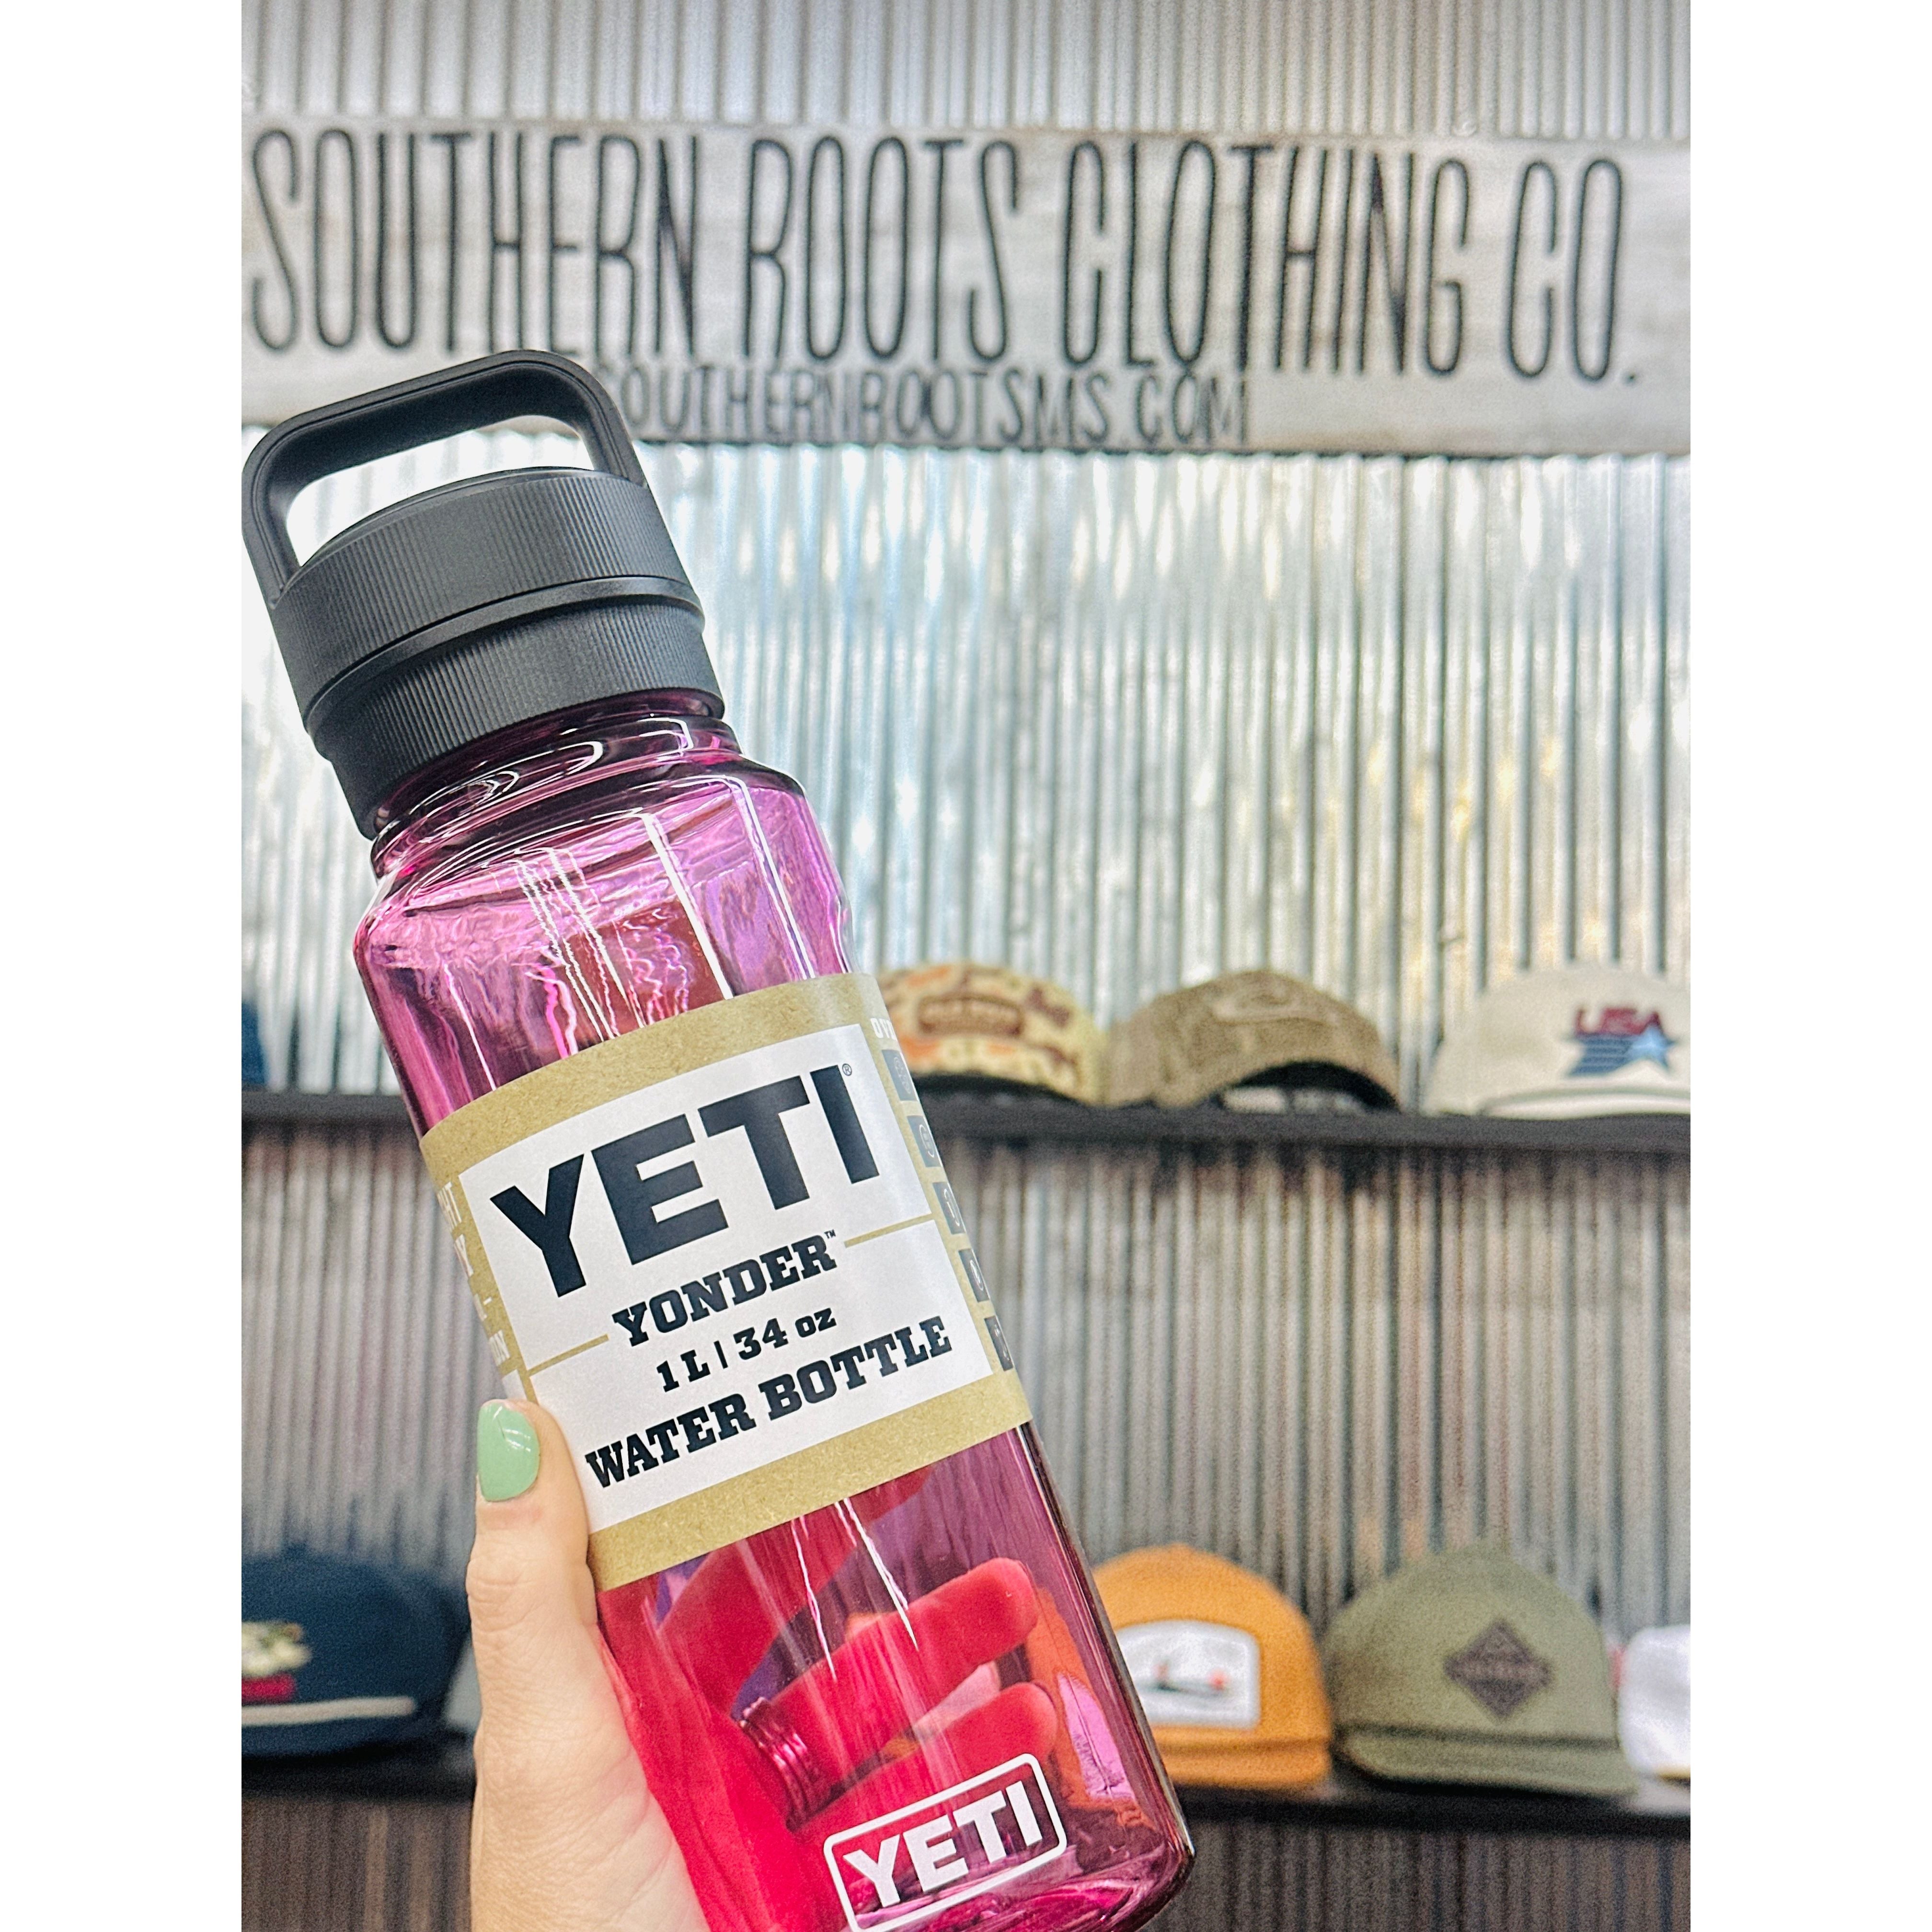 Yeti Yonder Bottles now in store! The Yonder™ Water Bottle was